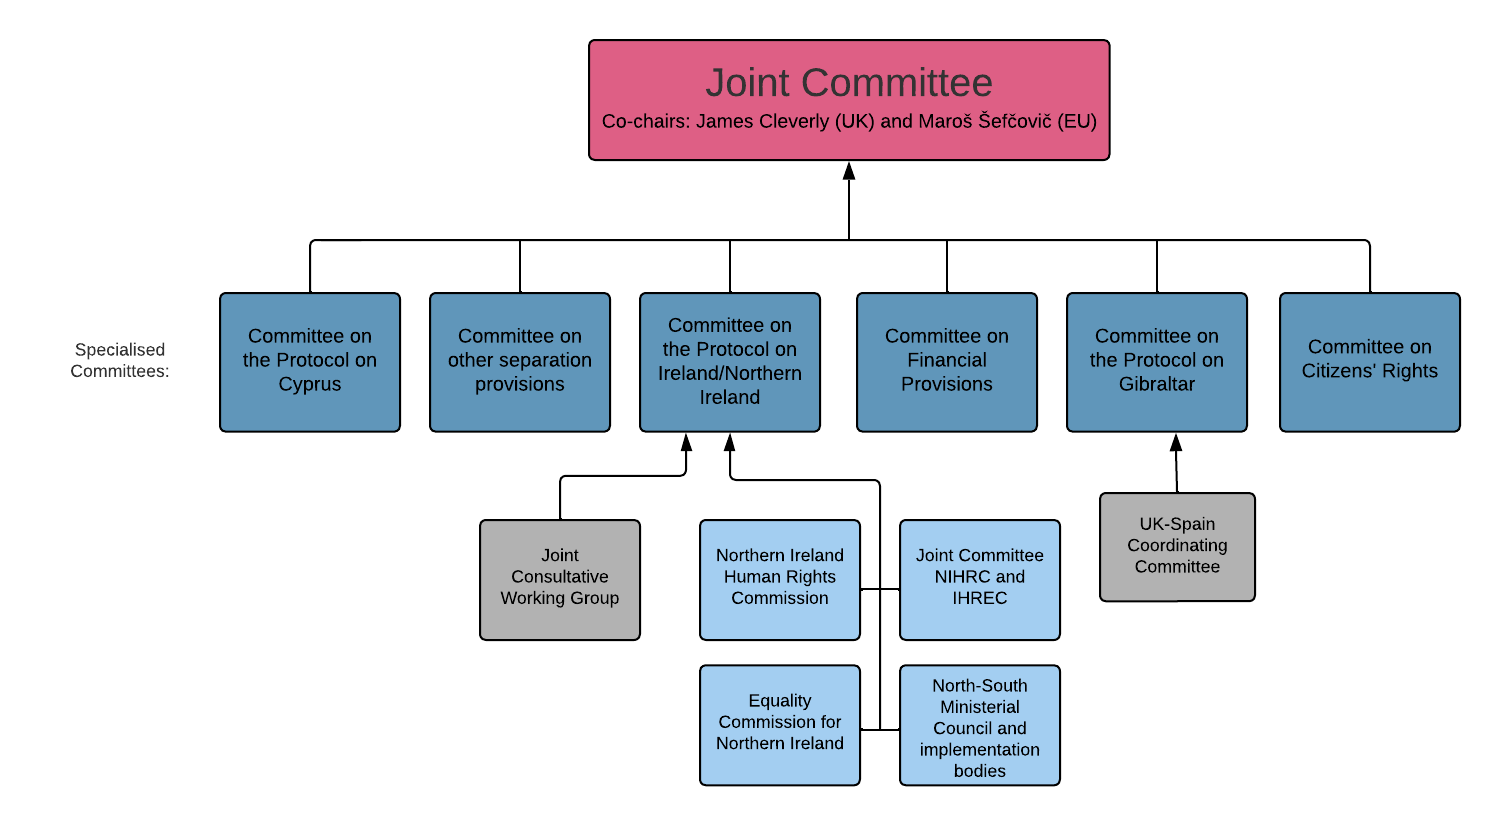 Governance structure for the Withdrawal Agreement